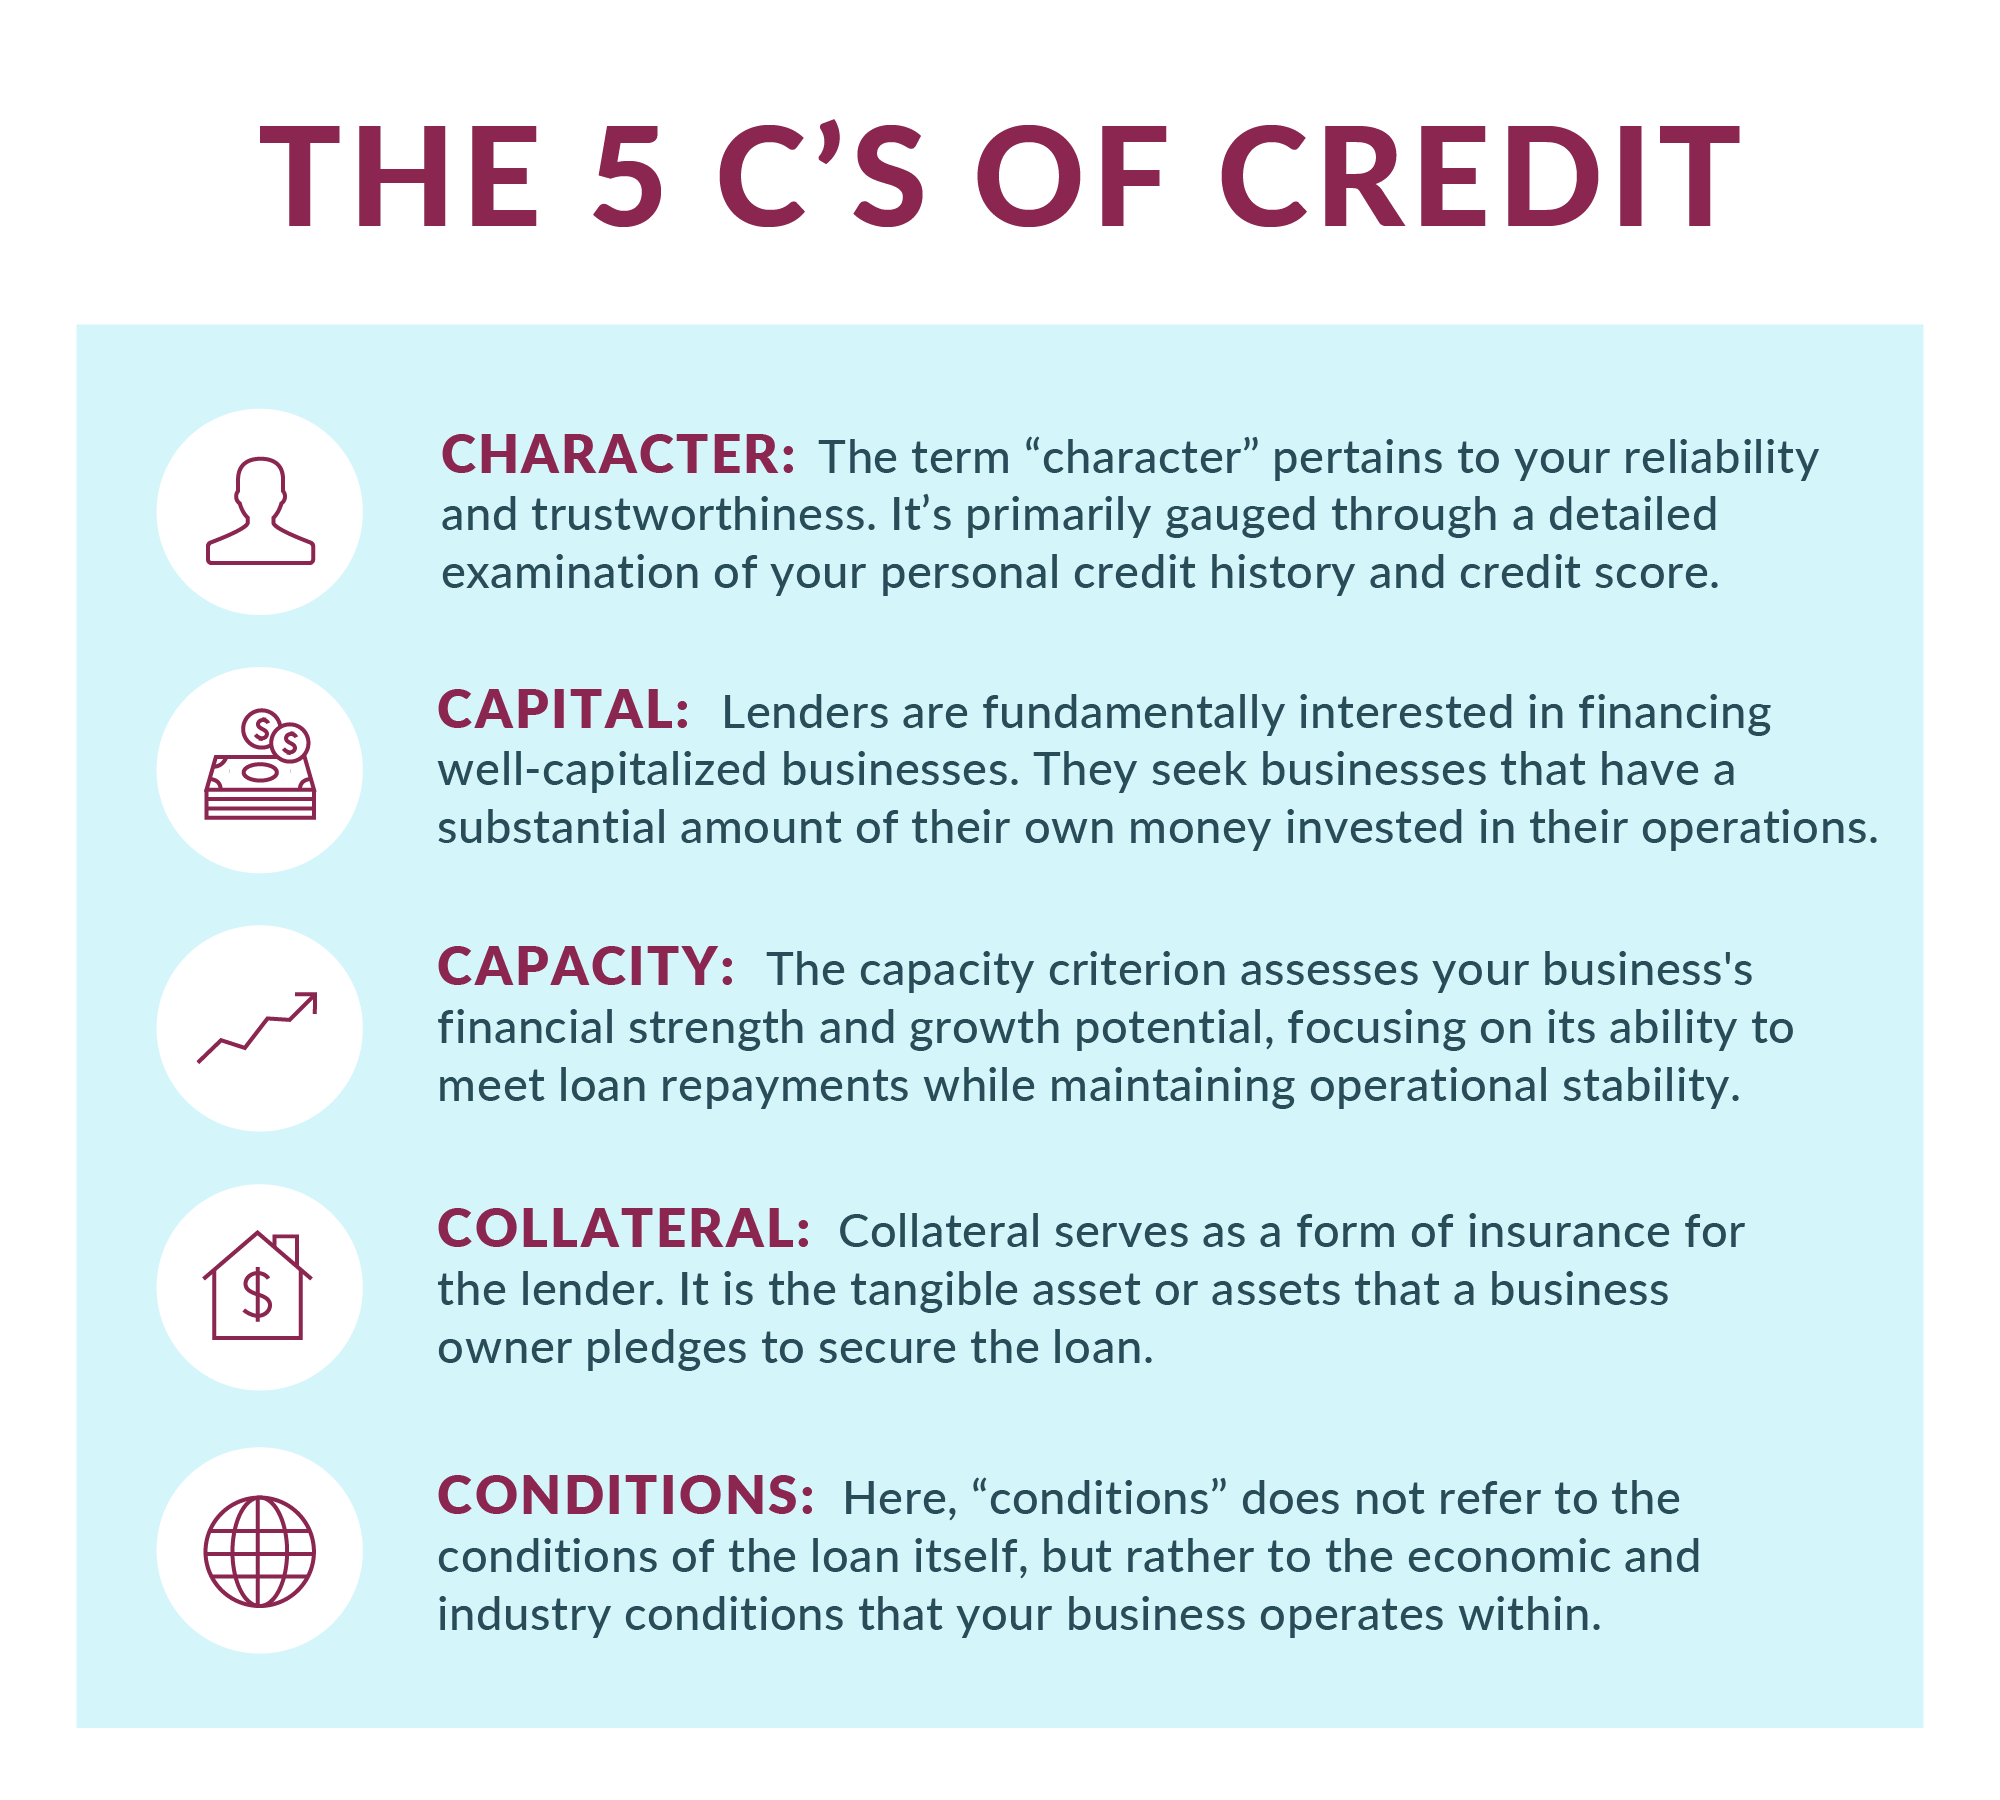 A detailed description of the 5 C's of Credit: Character, Capital, Capacity, Collateral, Conditions